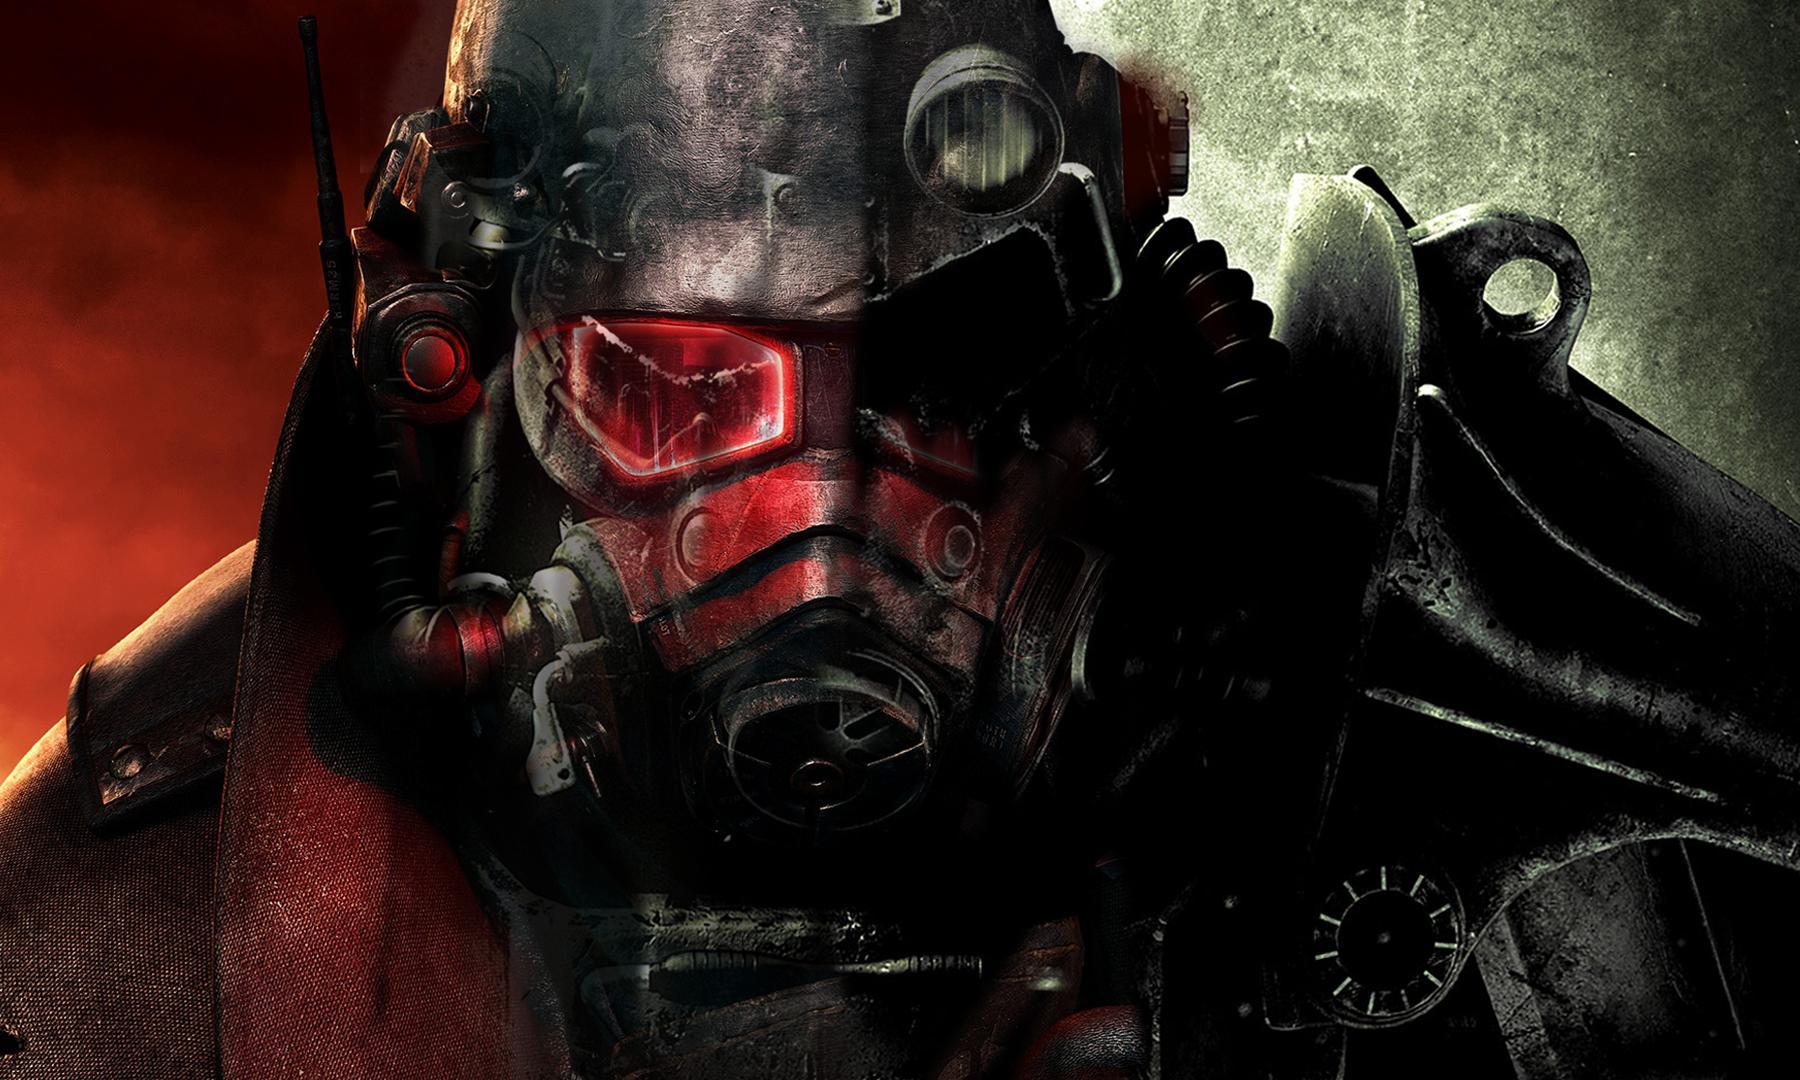 Fallout 3 Wallpapers Full HD - Wallpaper Cave